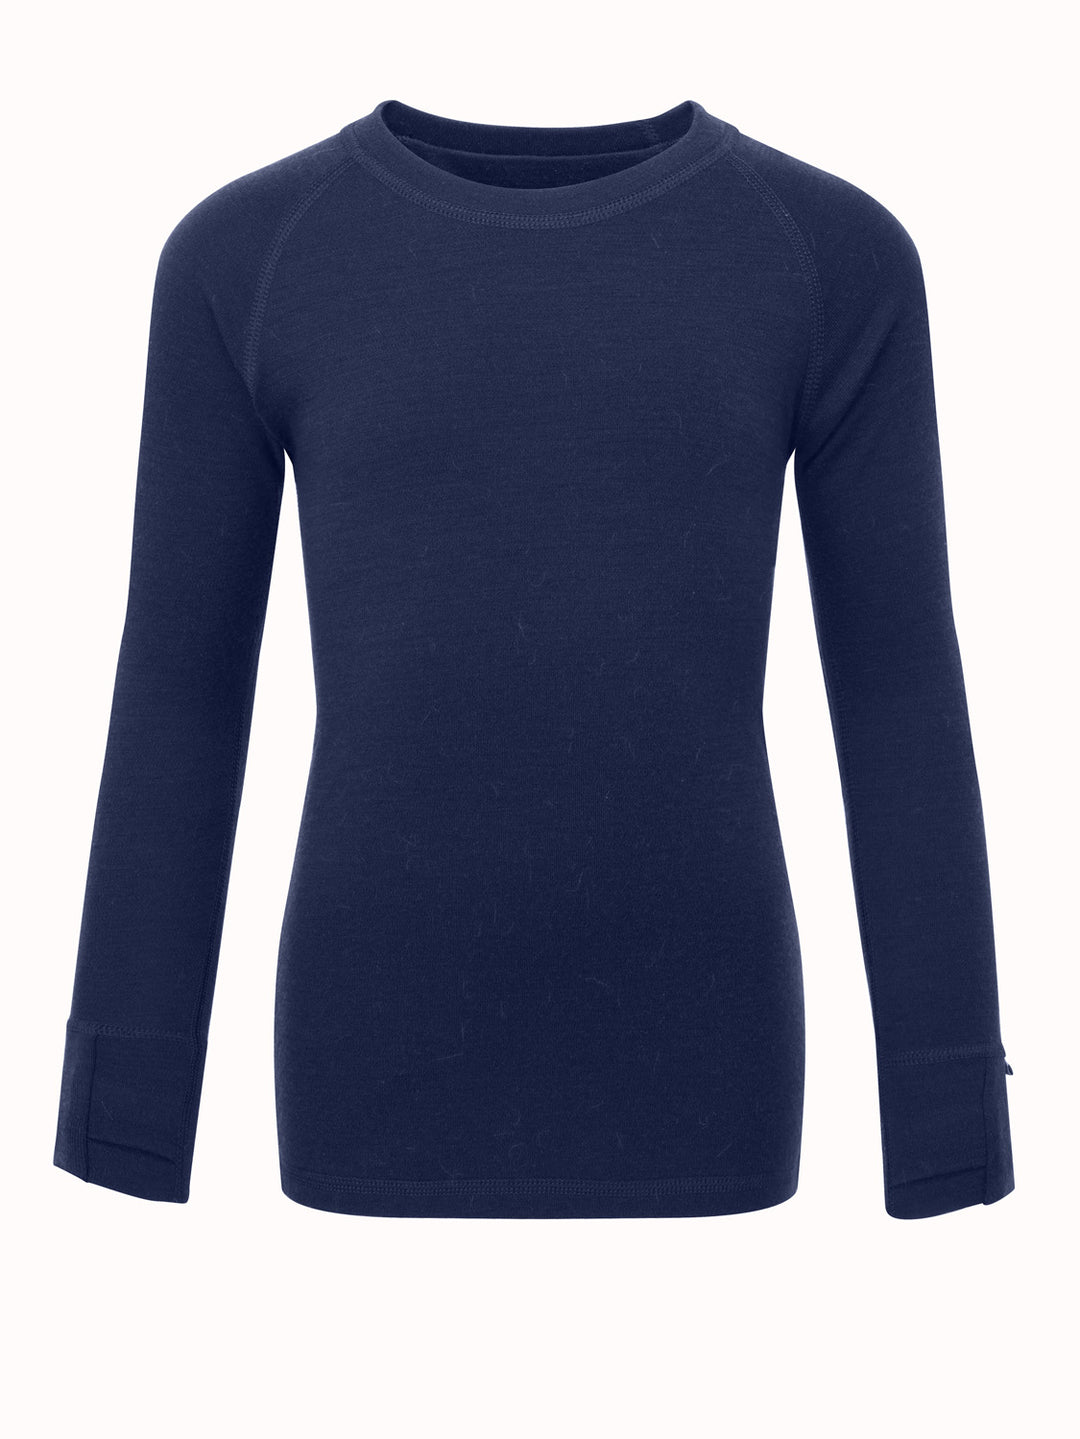 Merino kids thermal baselayer top navy #colour_french-navy